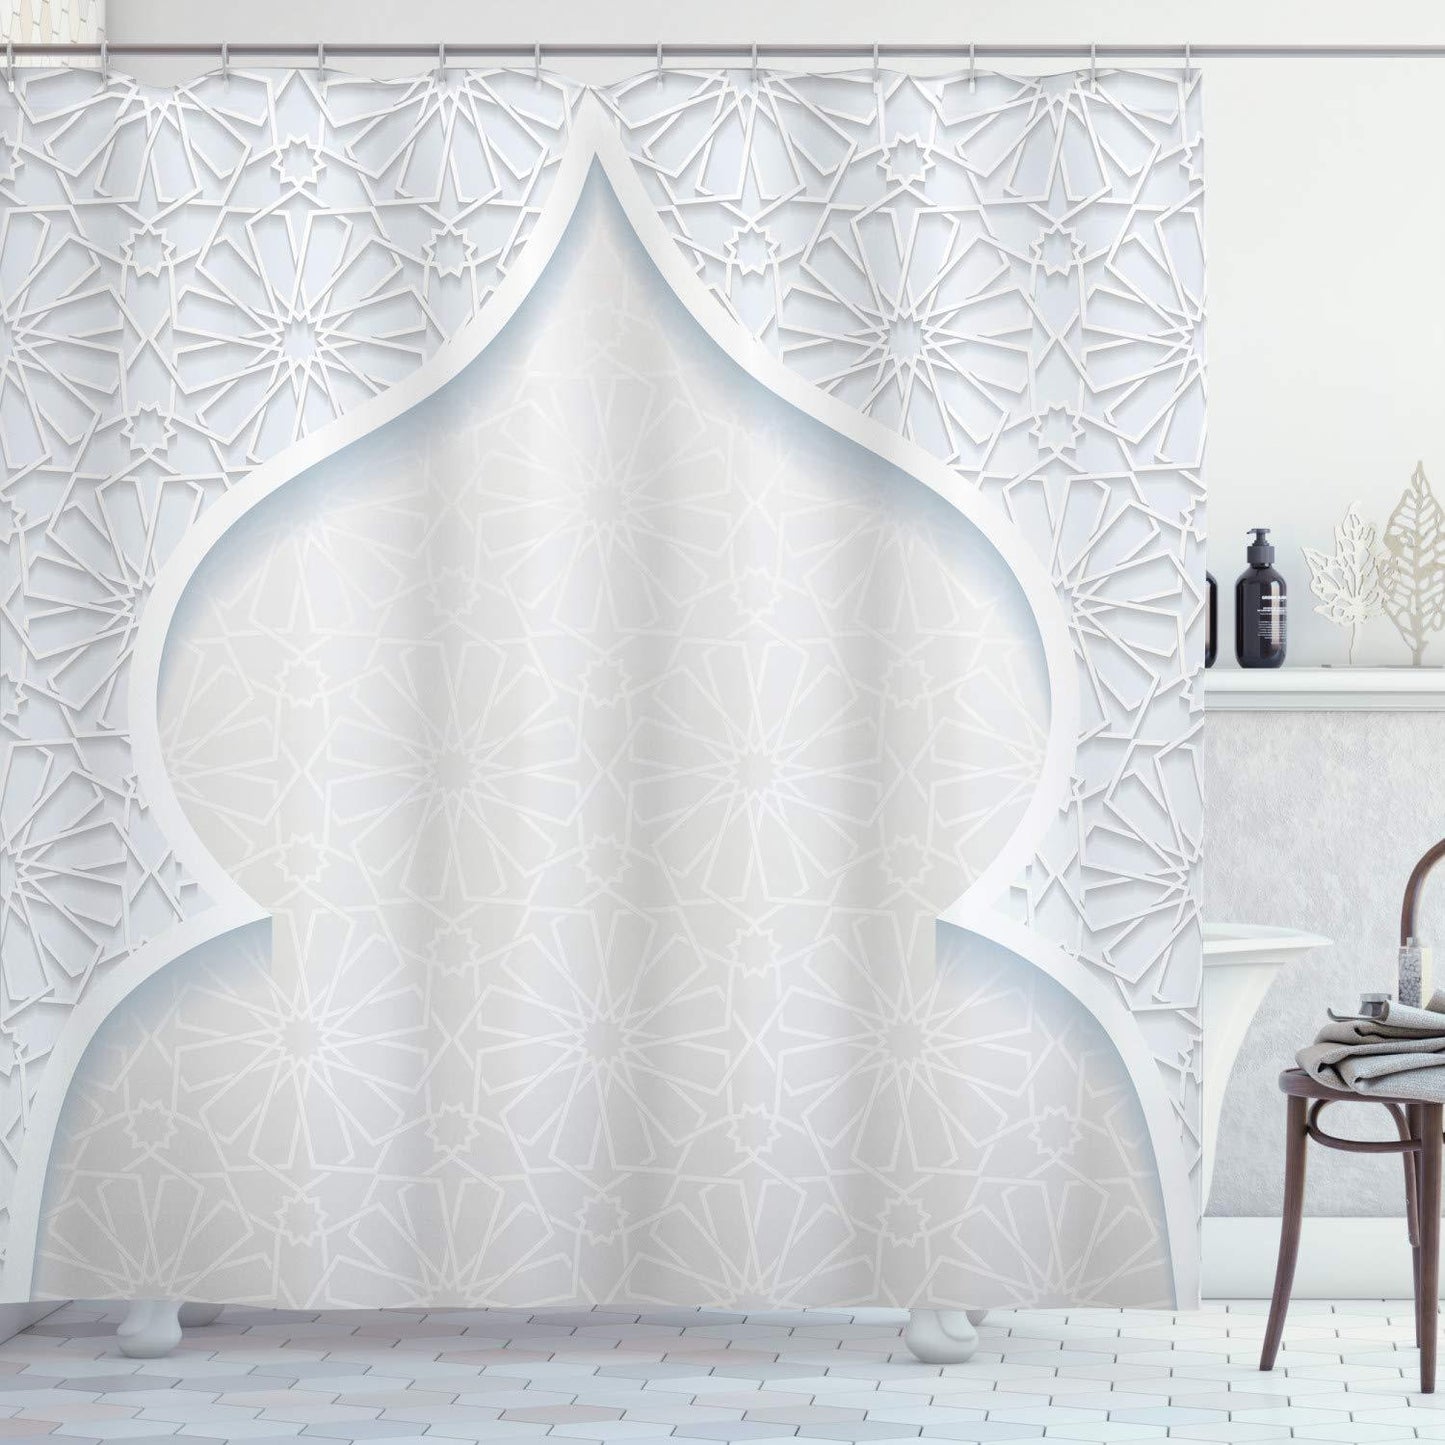 Tangiers Moroccan  Arch Shower Curtain